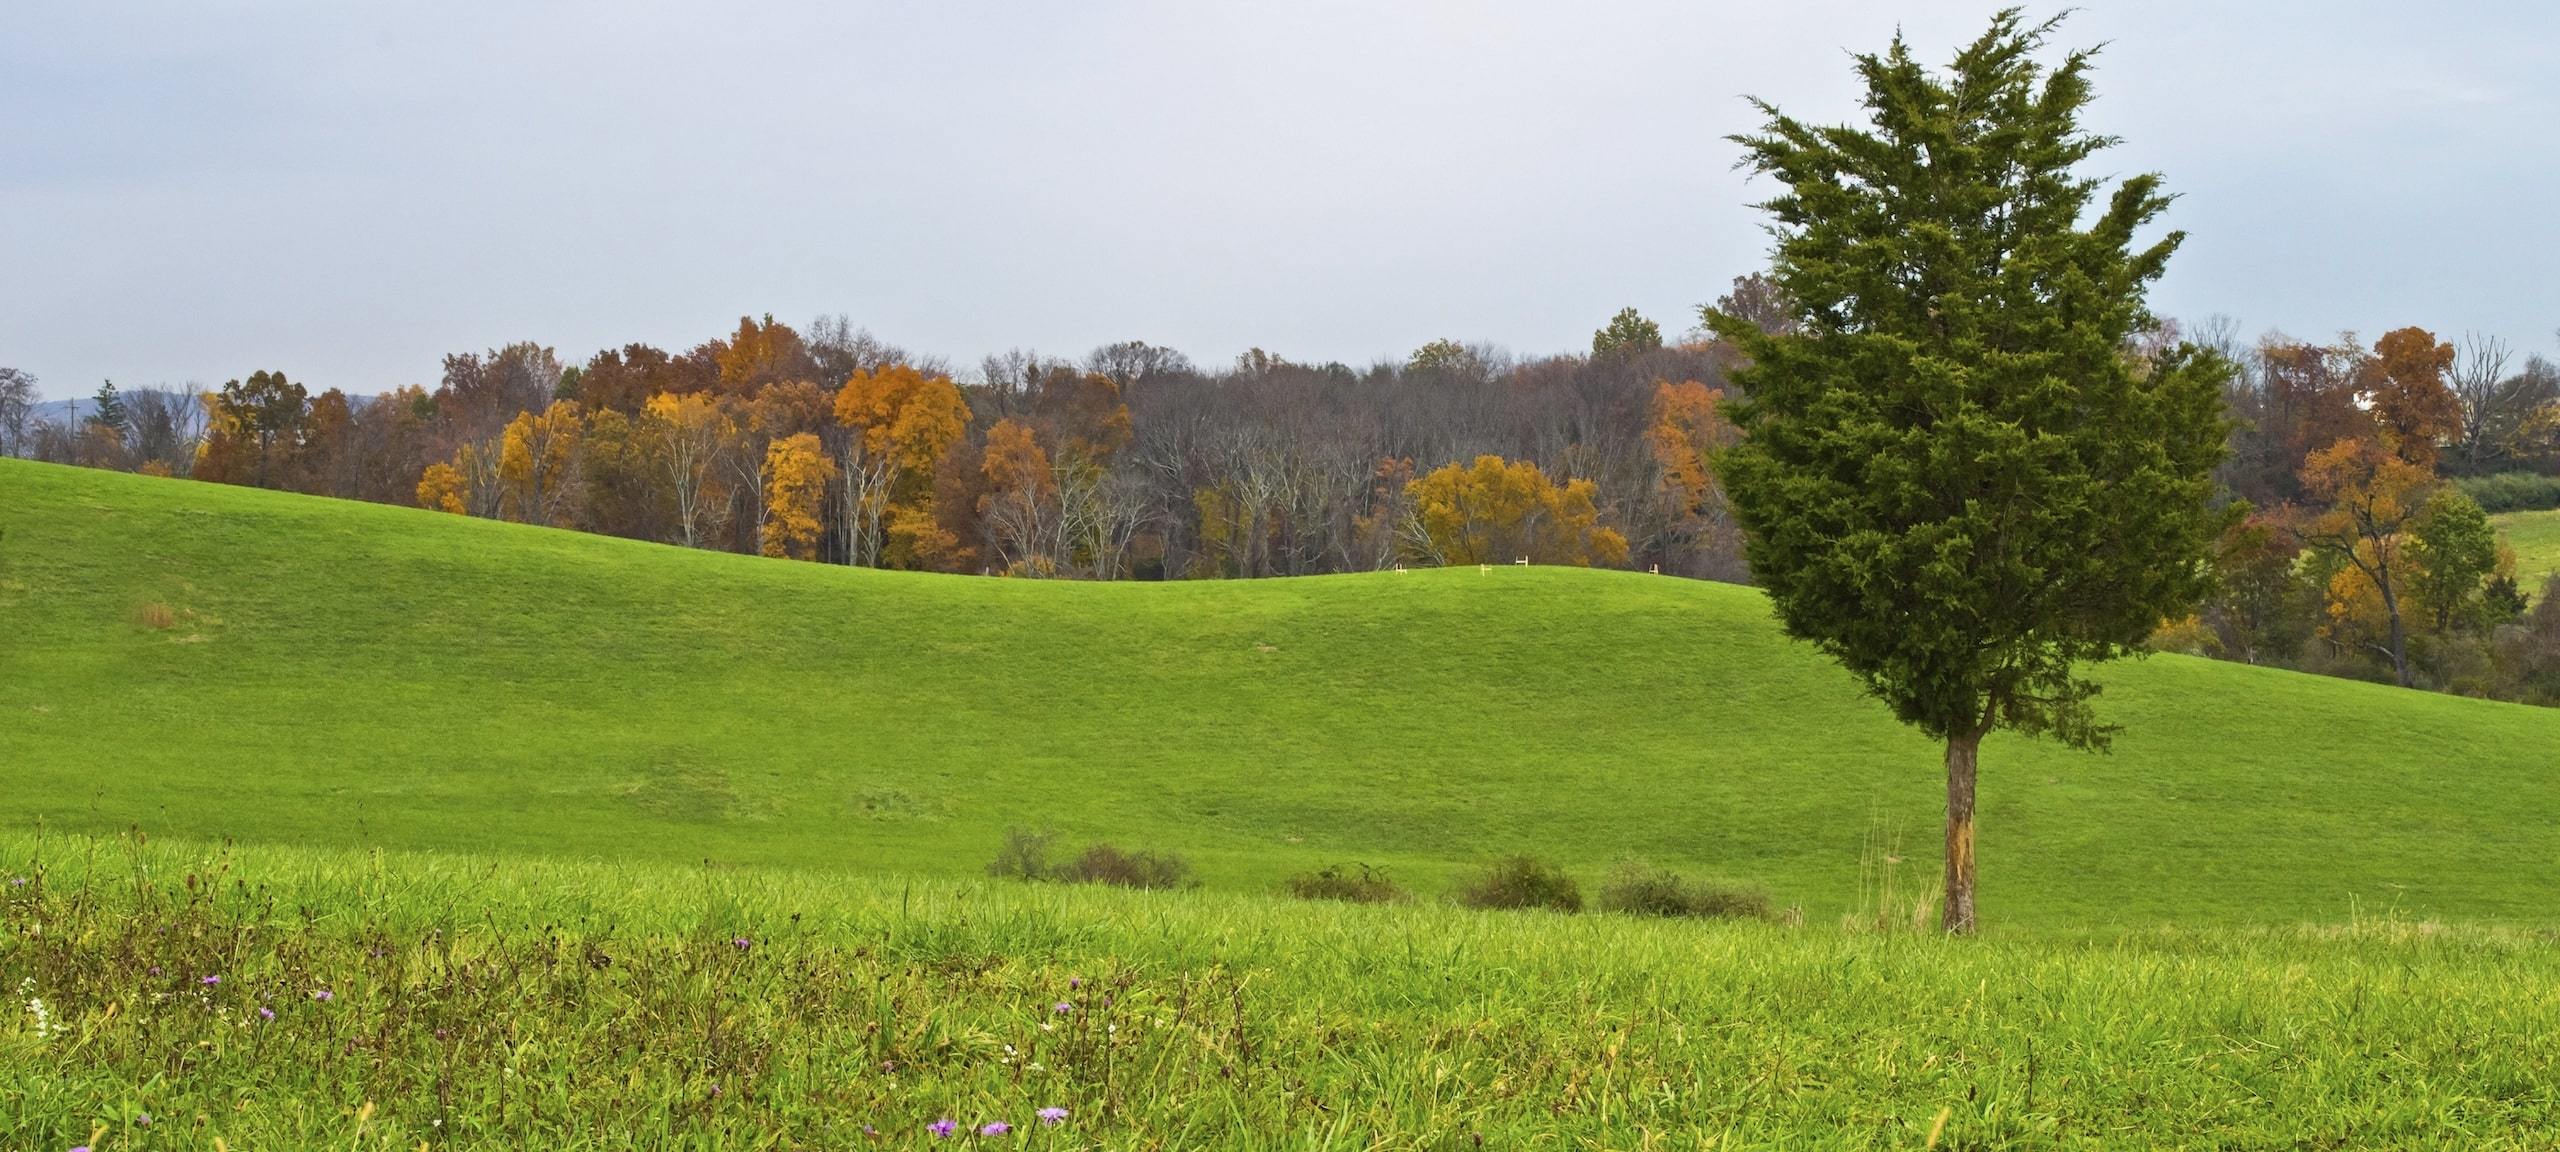 A single pine tree against a rolling green hill Autumn landscape in New Jersey.